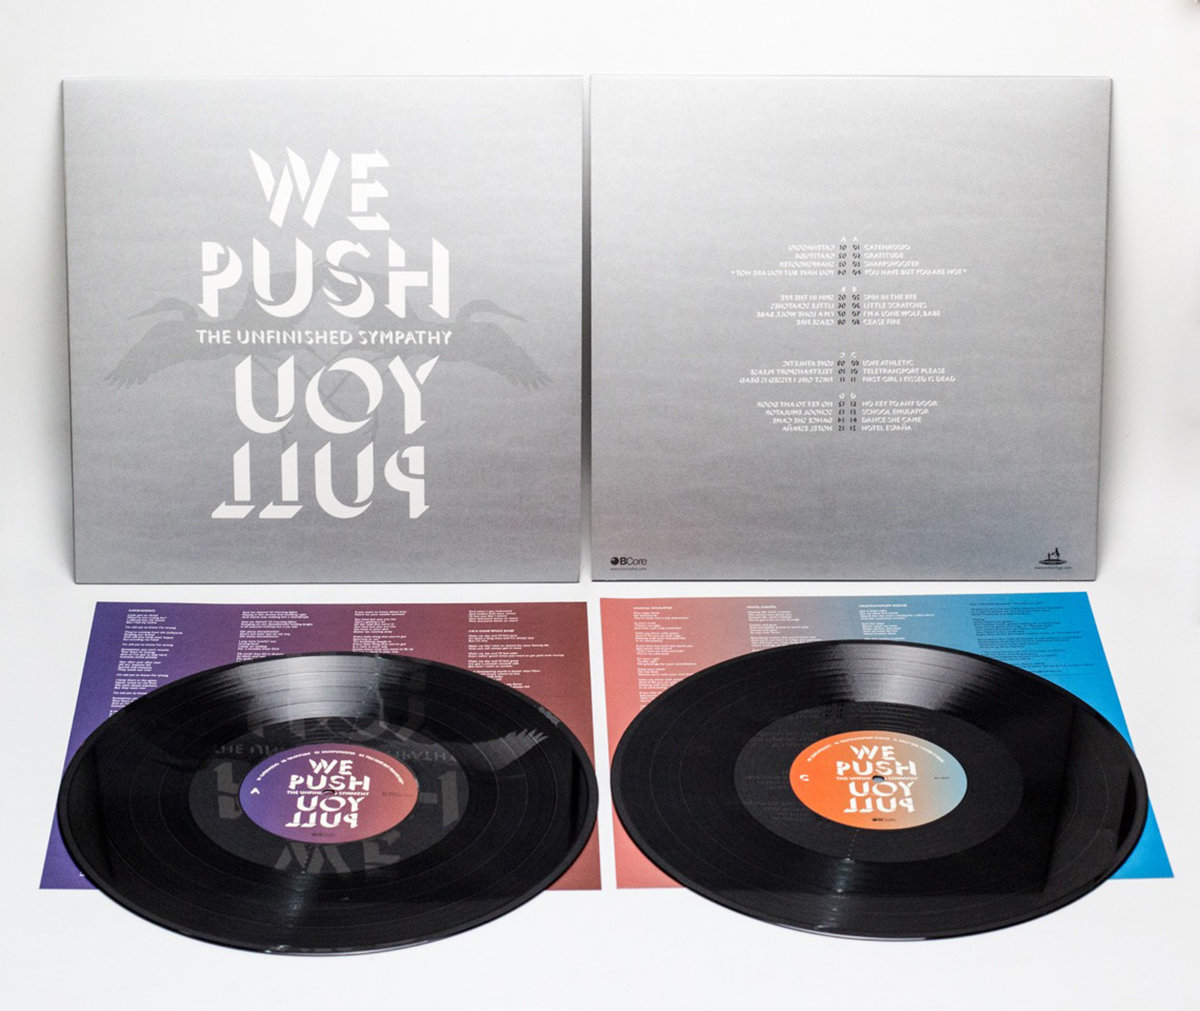 The Unfinished Sympathy "We push, you pull" 2LP